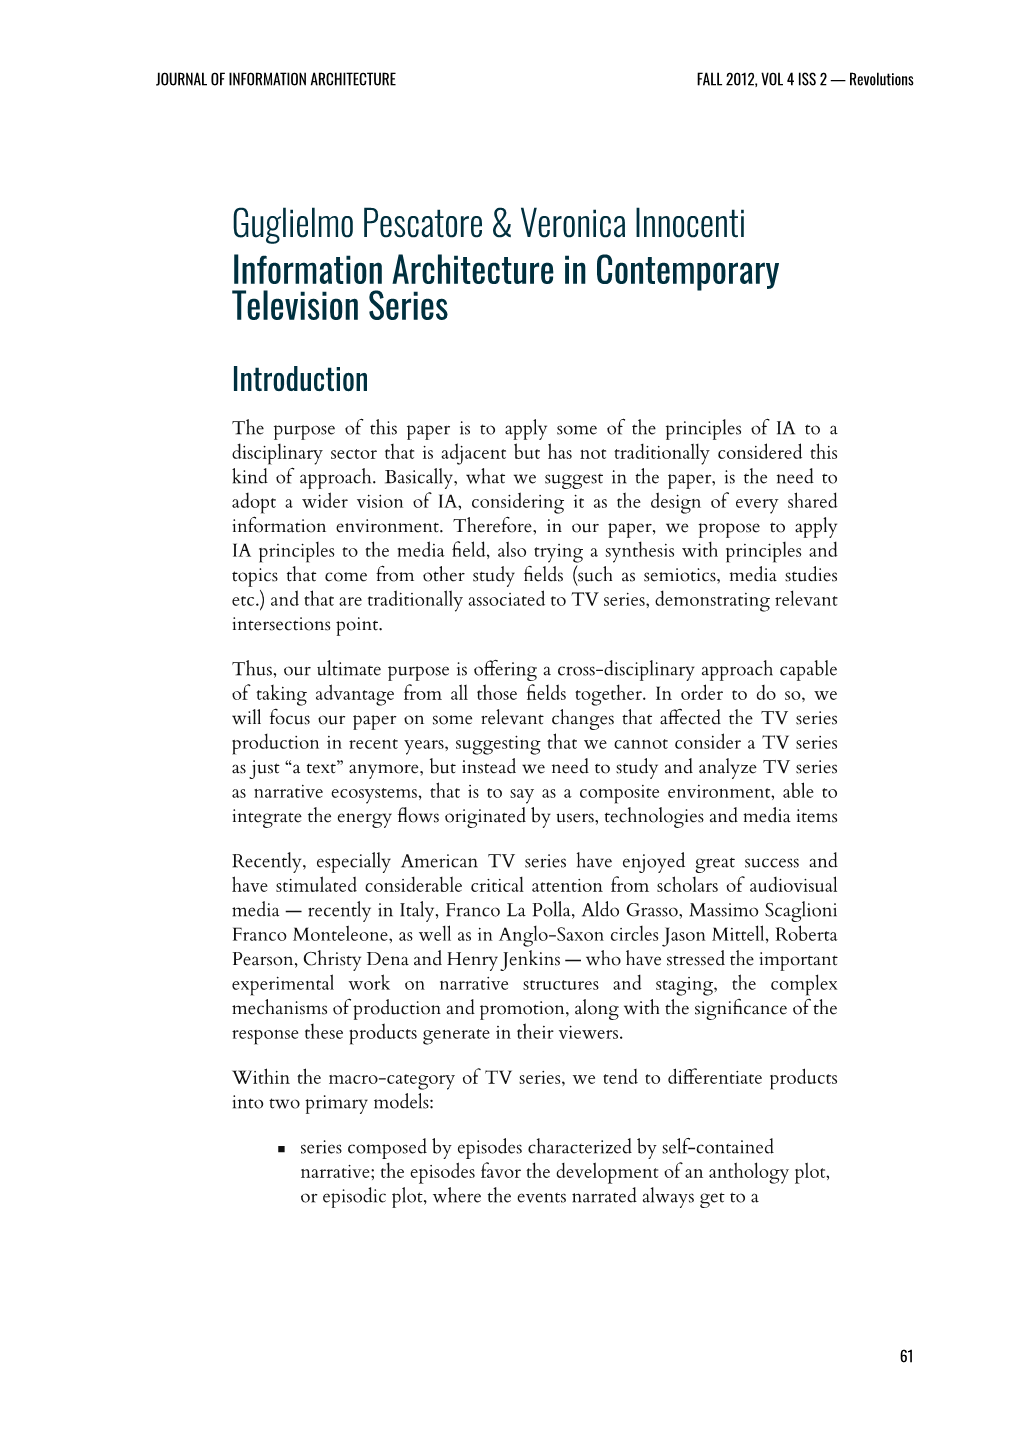 Information Architecture in Contemporary Television Series